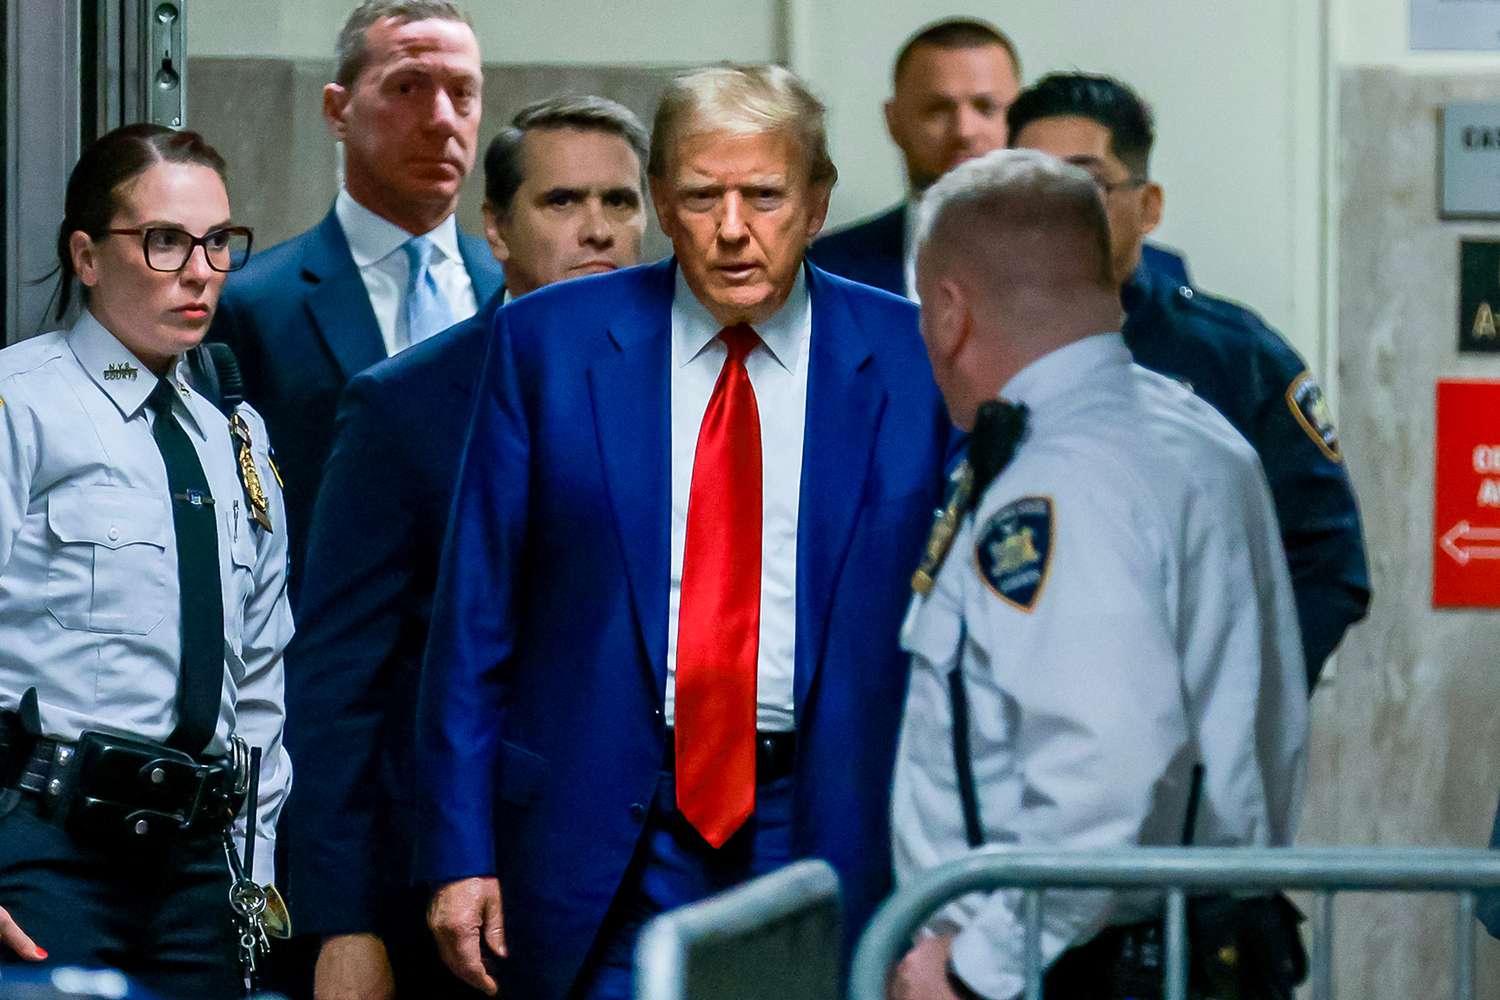 Former US President Donald Trump arrives for his hearing to determine the date of his trial for allegedly covering up hush money payments linked to extramarital affairs, at Manhattan Criminal Court in New York City on March 25, 2024.